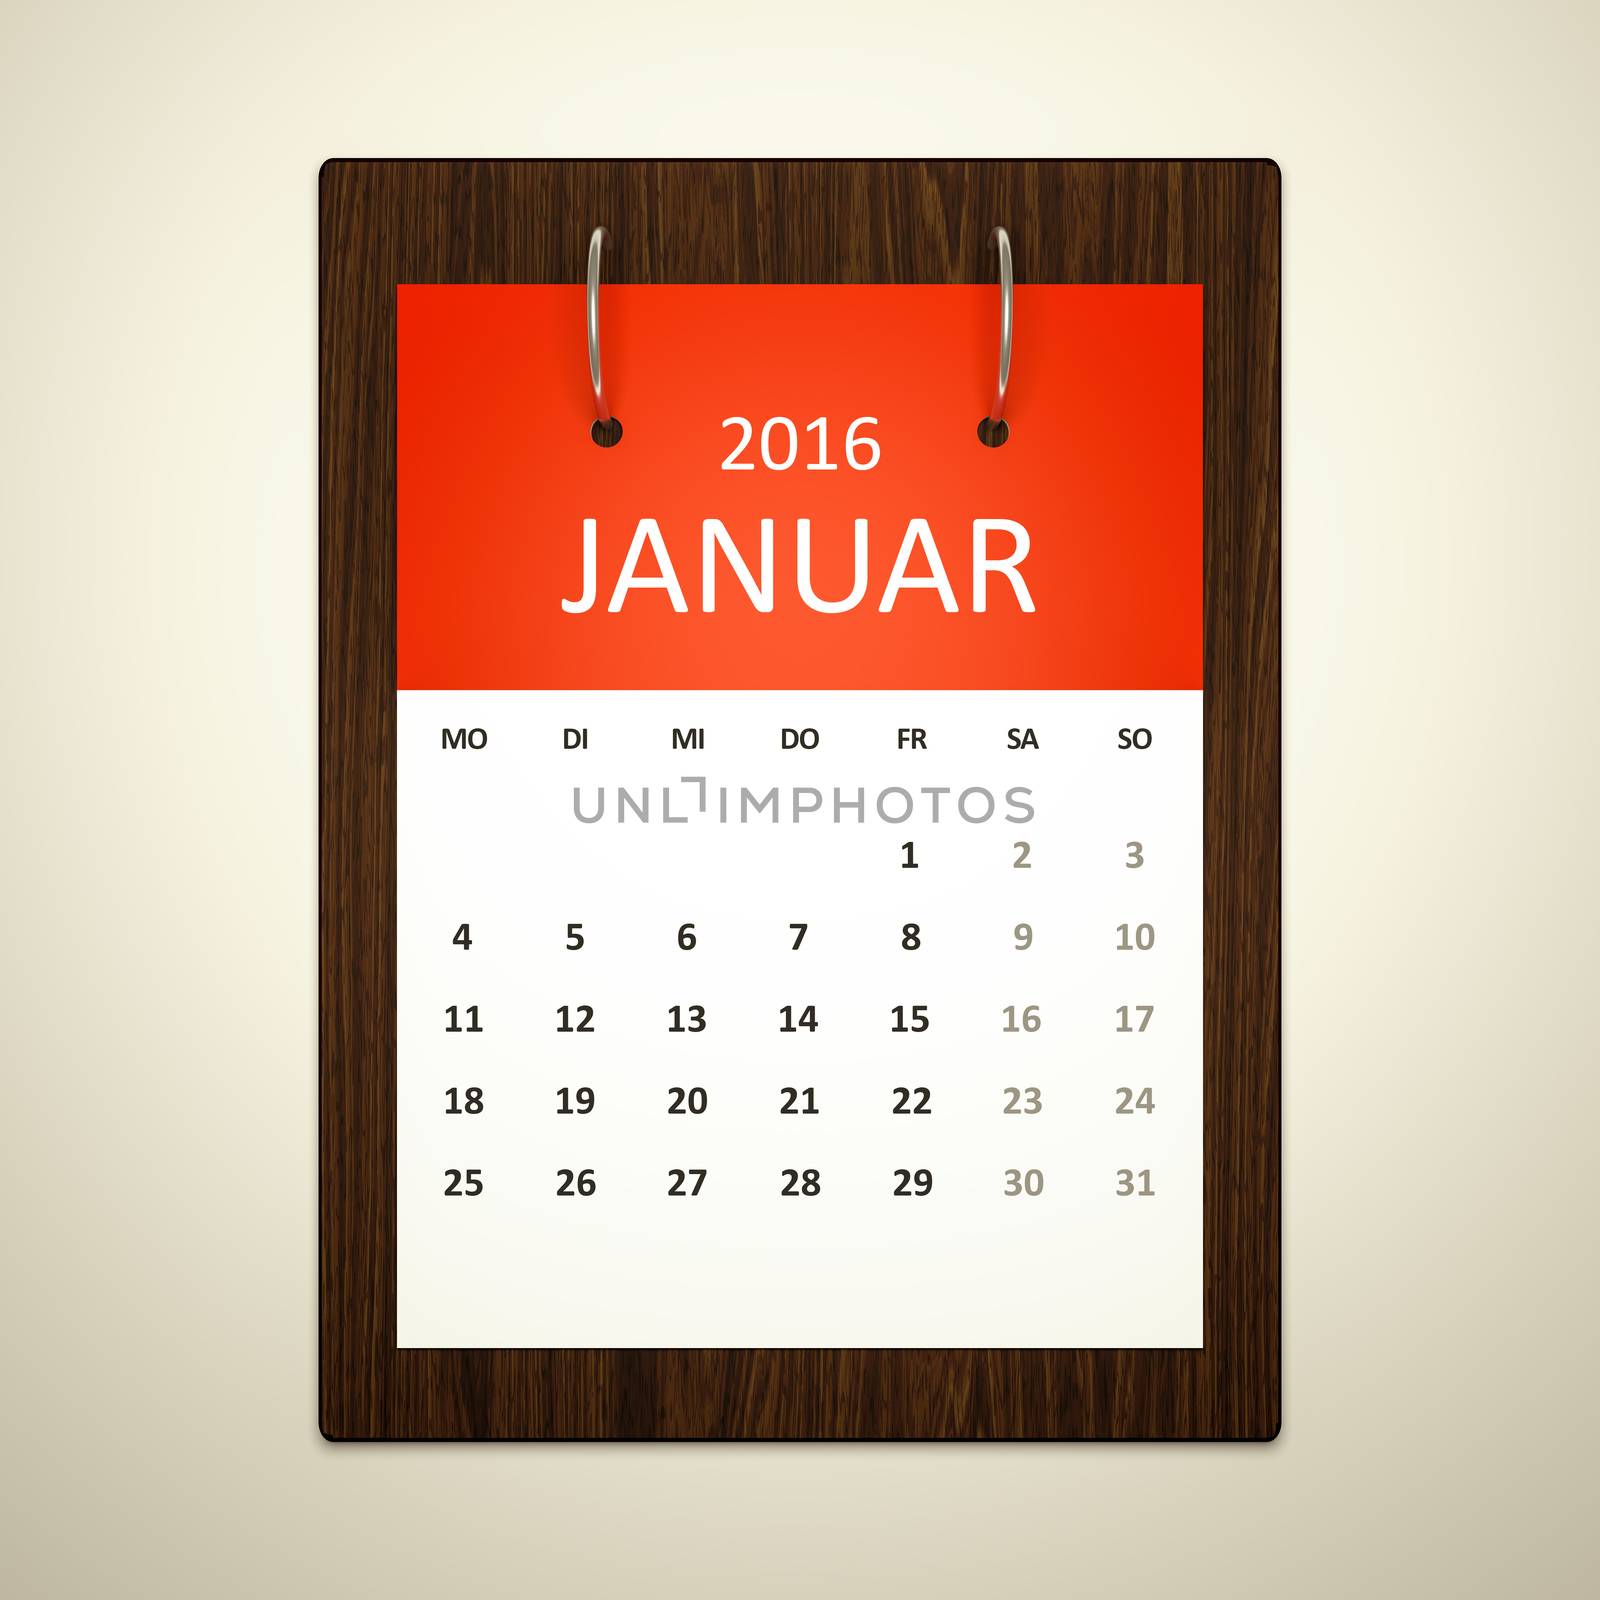 An image of a german calendar for event planning 2016 january